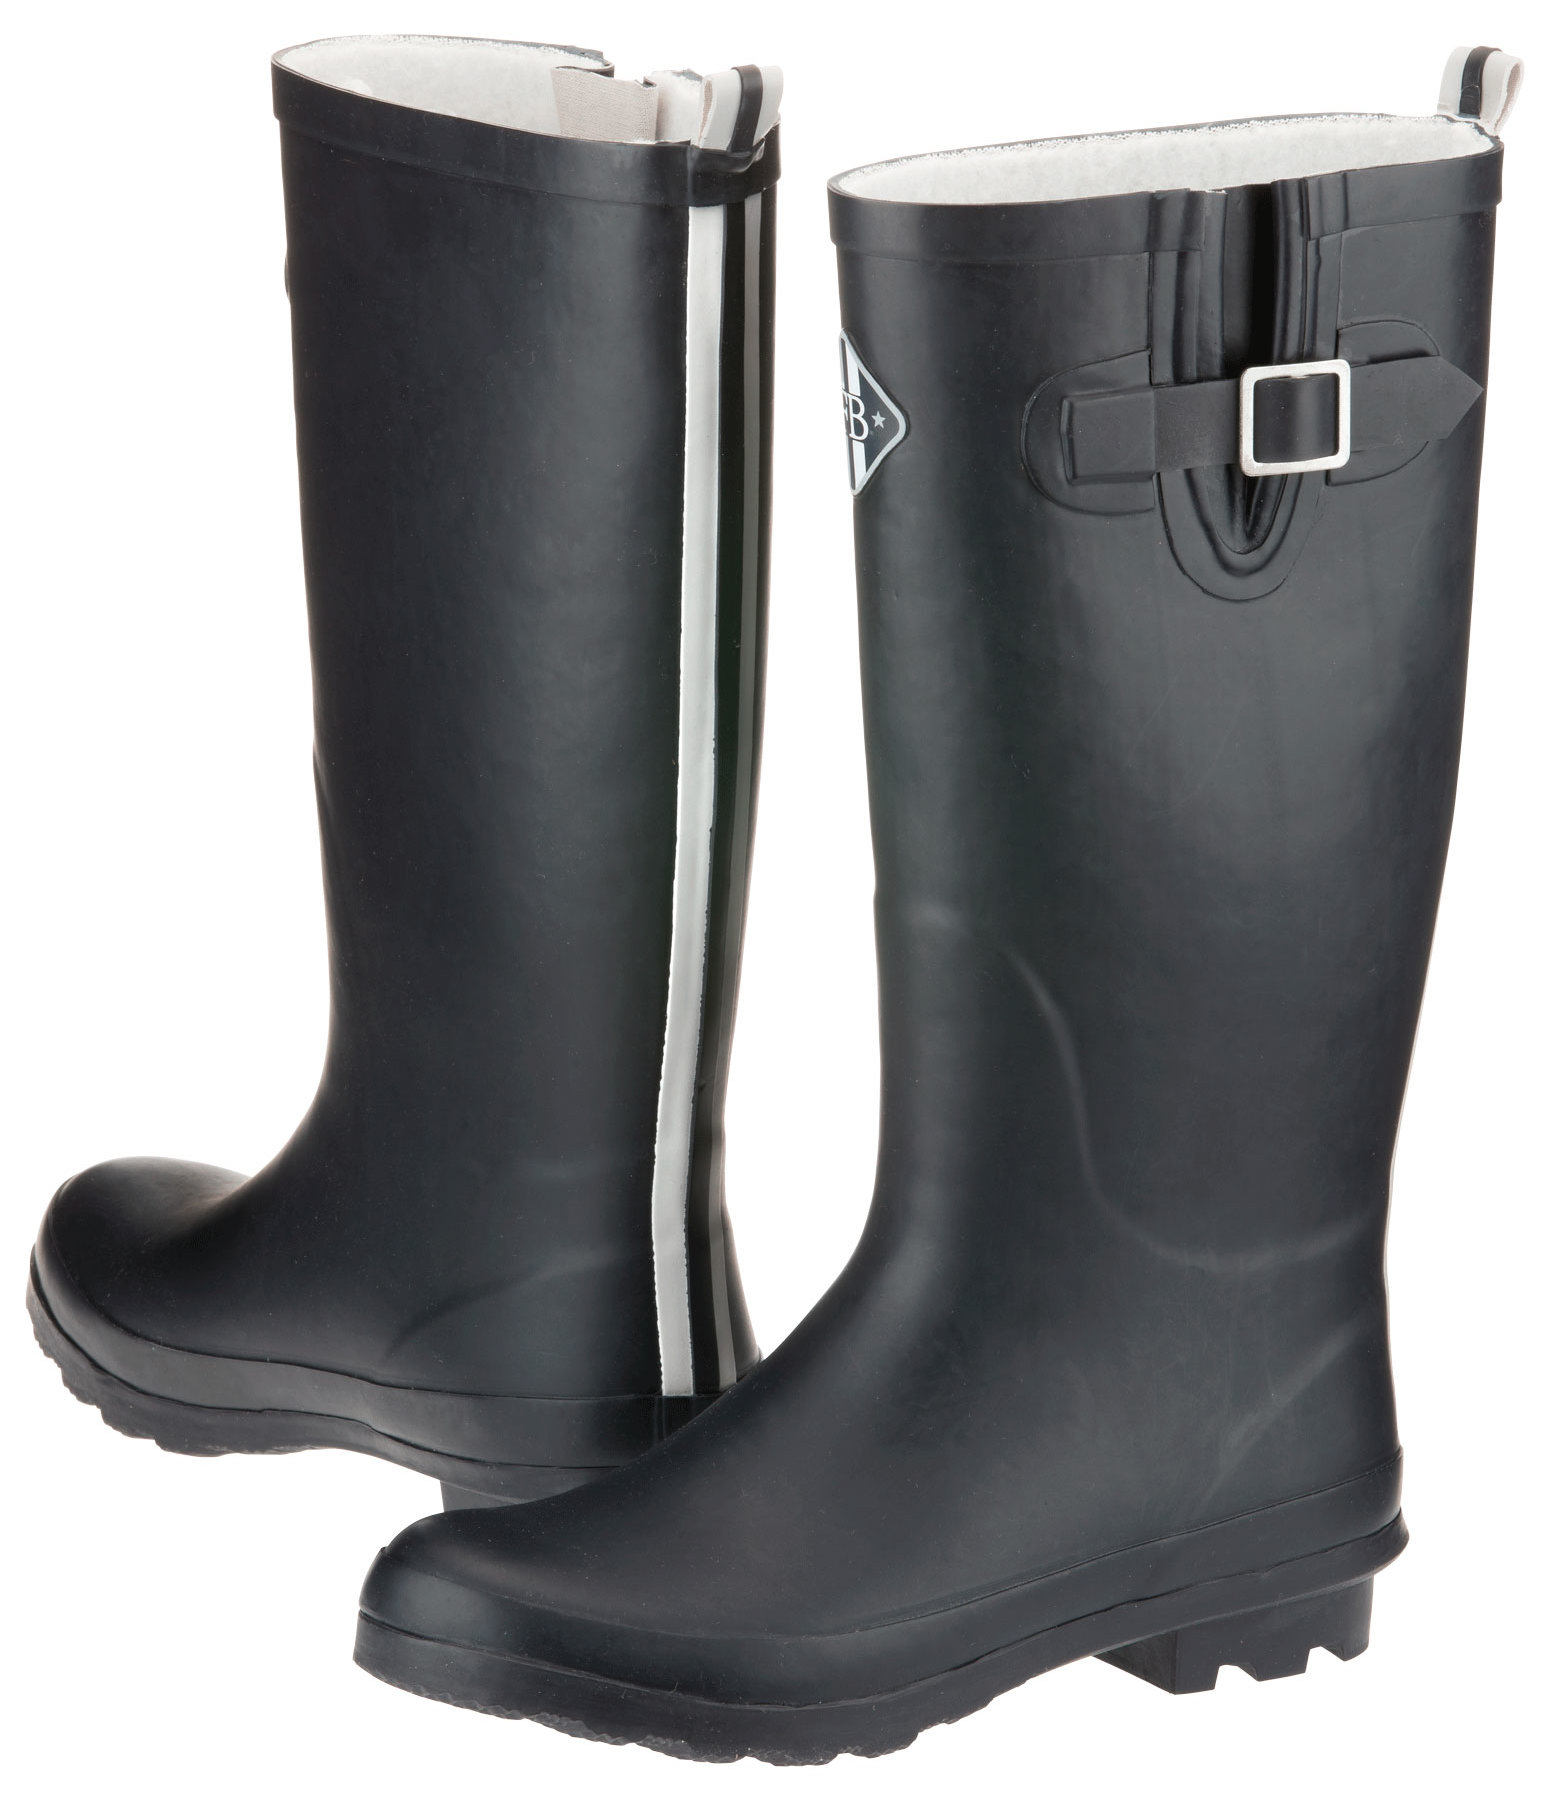 Winter Rubber Boots Classic